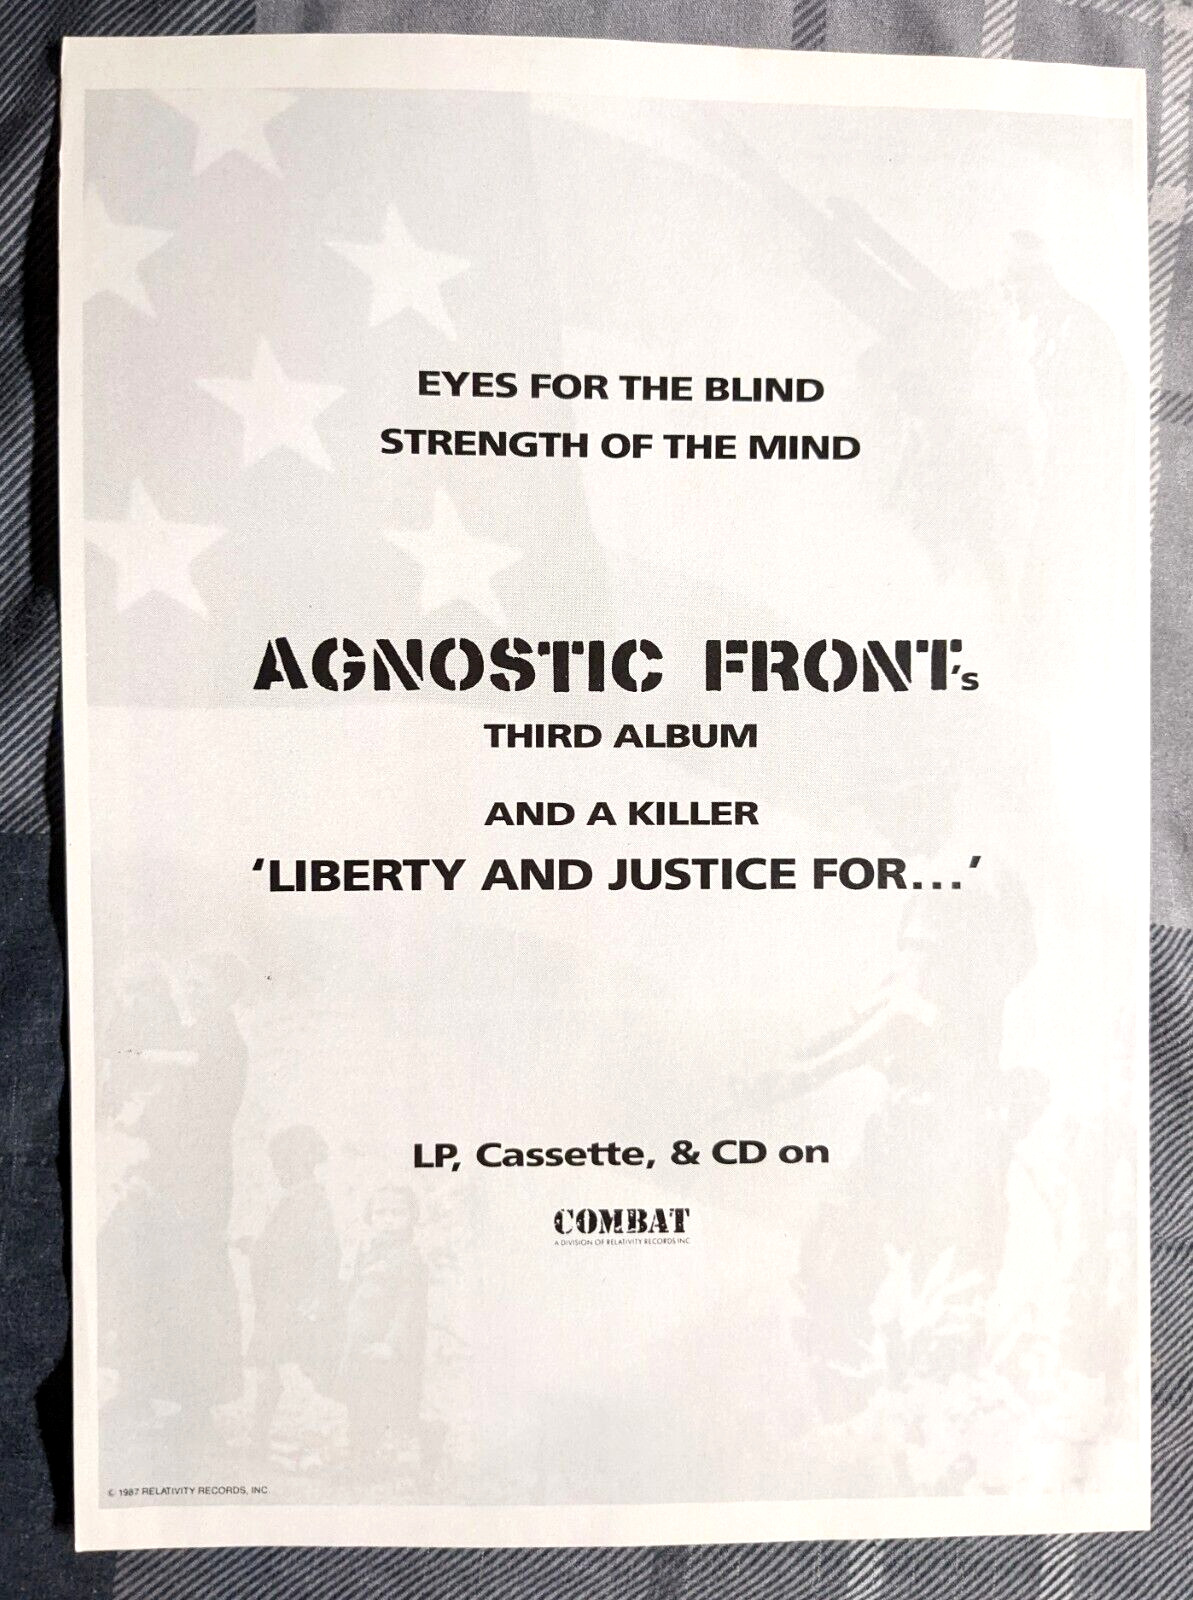 Agnostic Front / 1987 Liberty And Justice For.. Lp / Album Magazine Print Ad